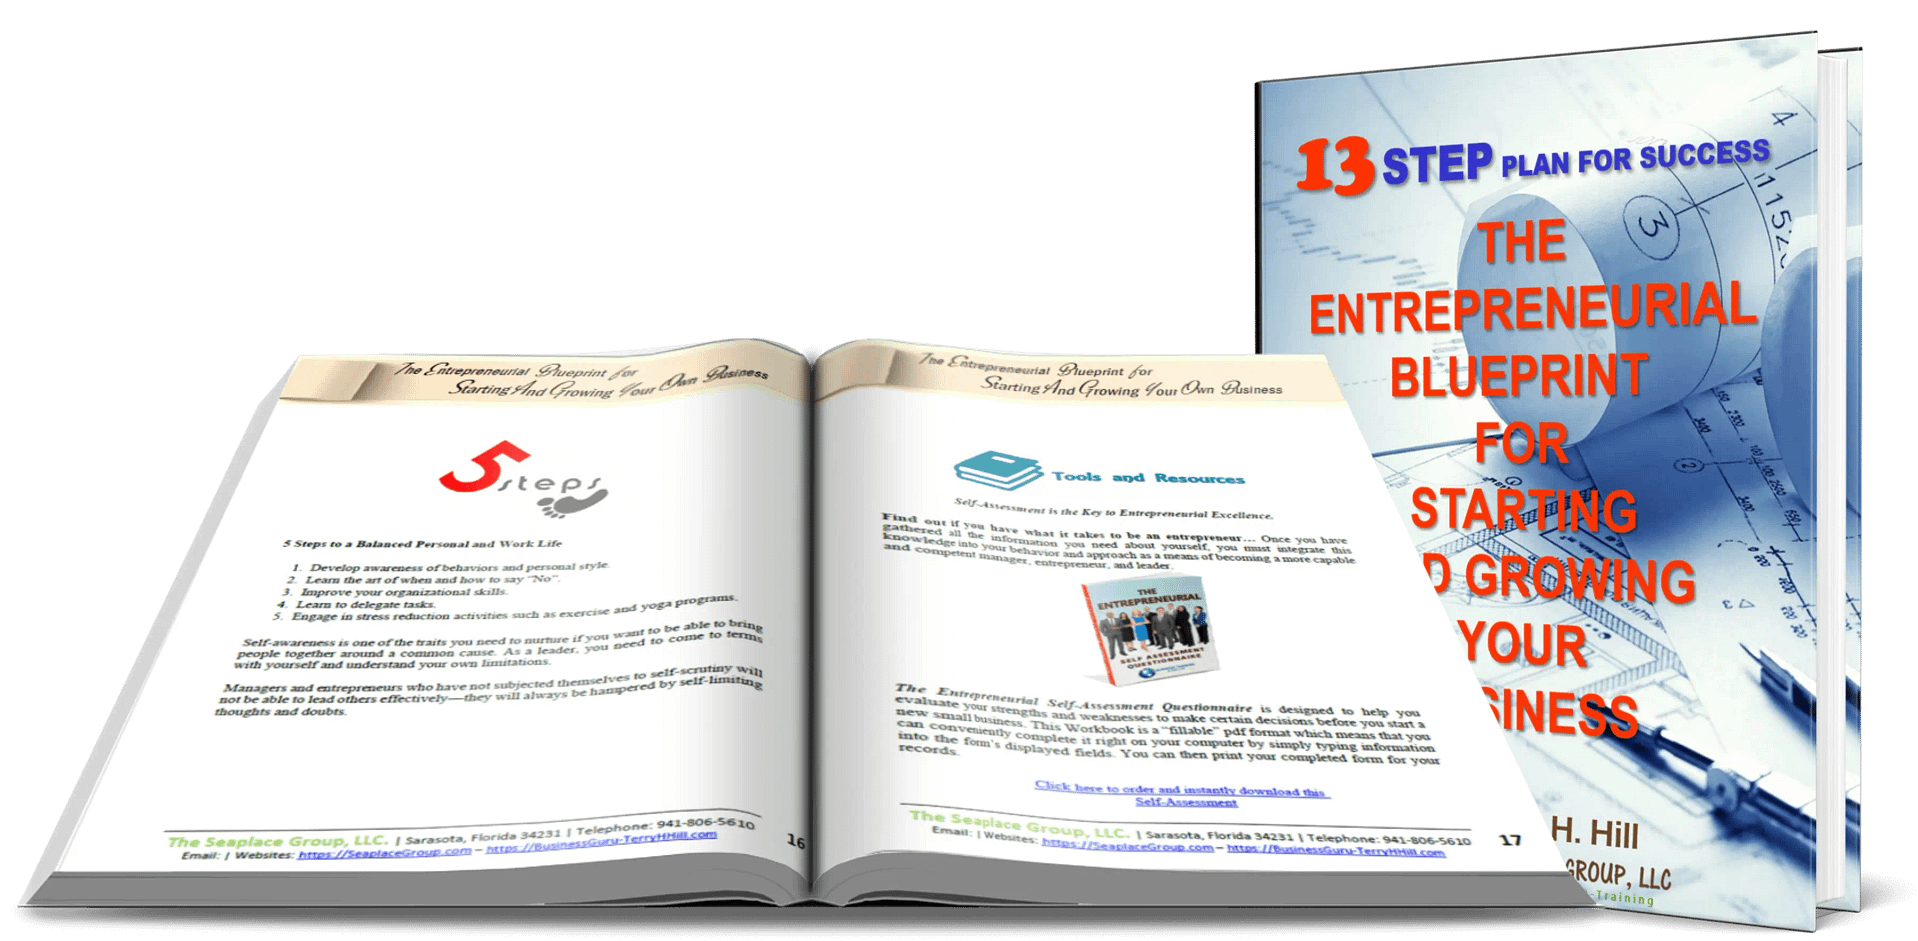 The Entrepreneurial Blueprint for Starting and Growing Your Business is a step-by-step reference guide to provide thoughts and ideas to some of the most pressing issues and challenges you face as a business owner or aspiring entrepreneur.